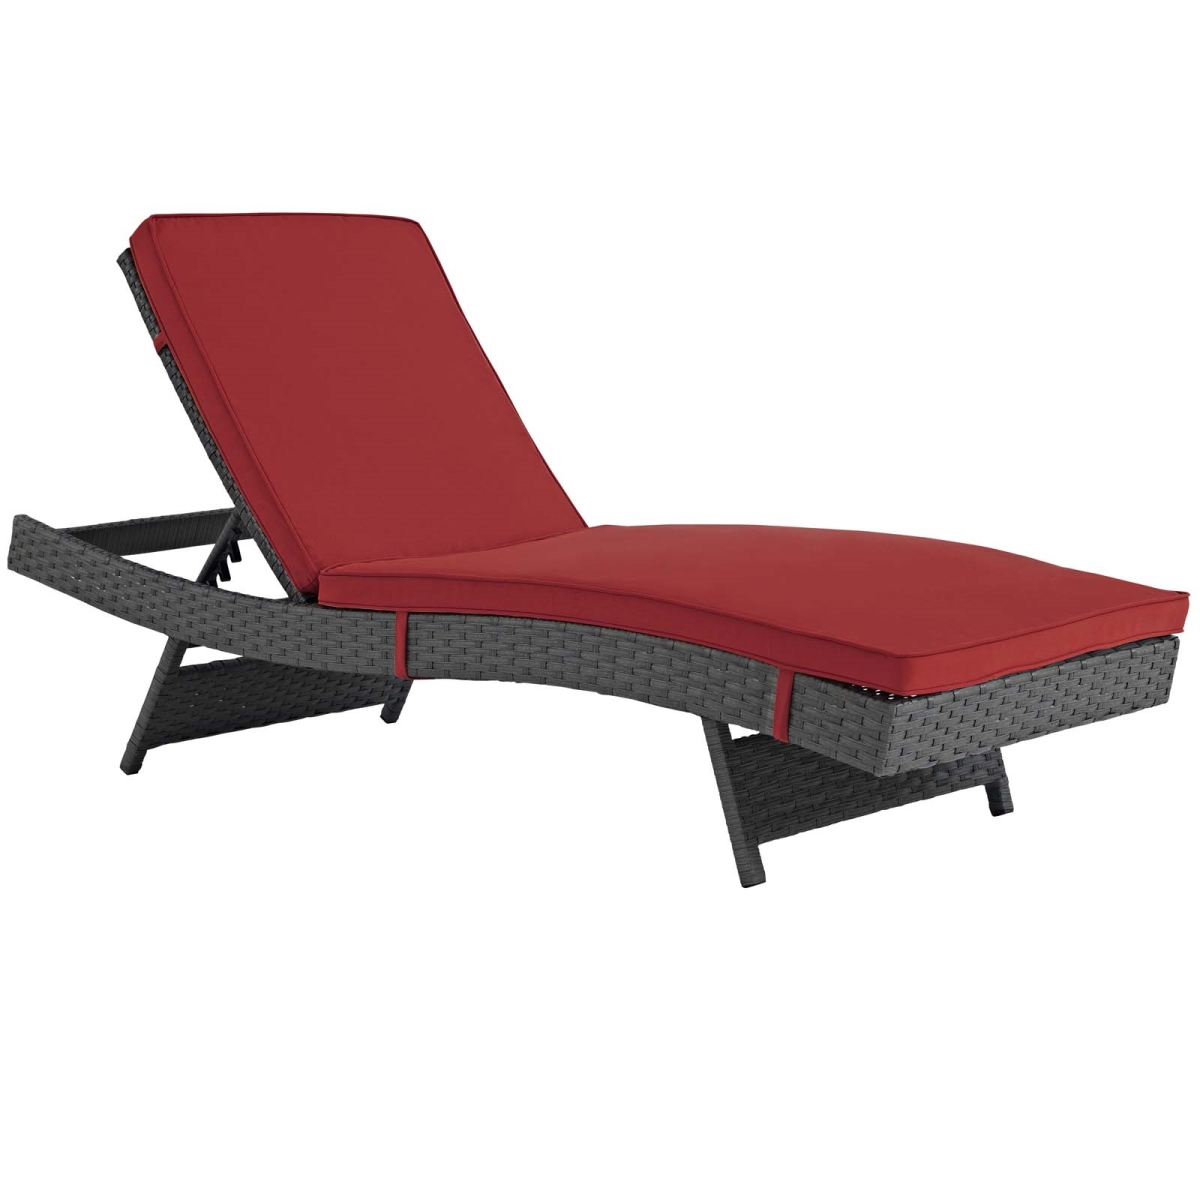 Eei-1985-chc-red 17 - 37.5 X 78.5 In. Sojour Outdoor Pati Sunbrella Chaise - Canvas & Red